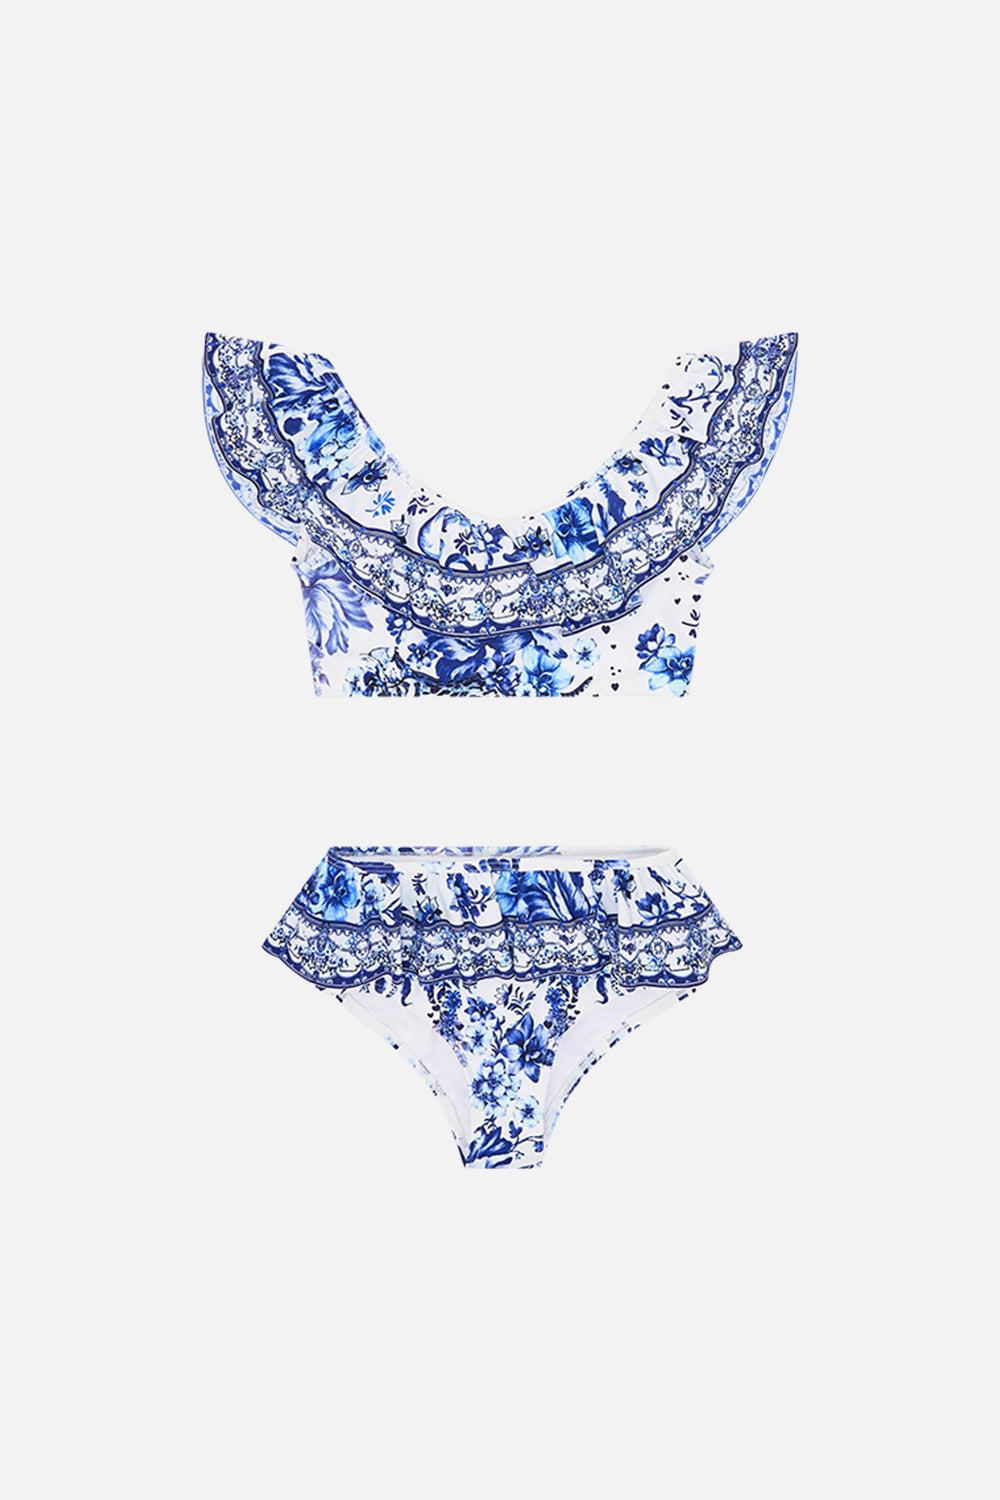 Front product view of Milla By CAMILLA kids frill bikini in Glaze and Graze print